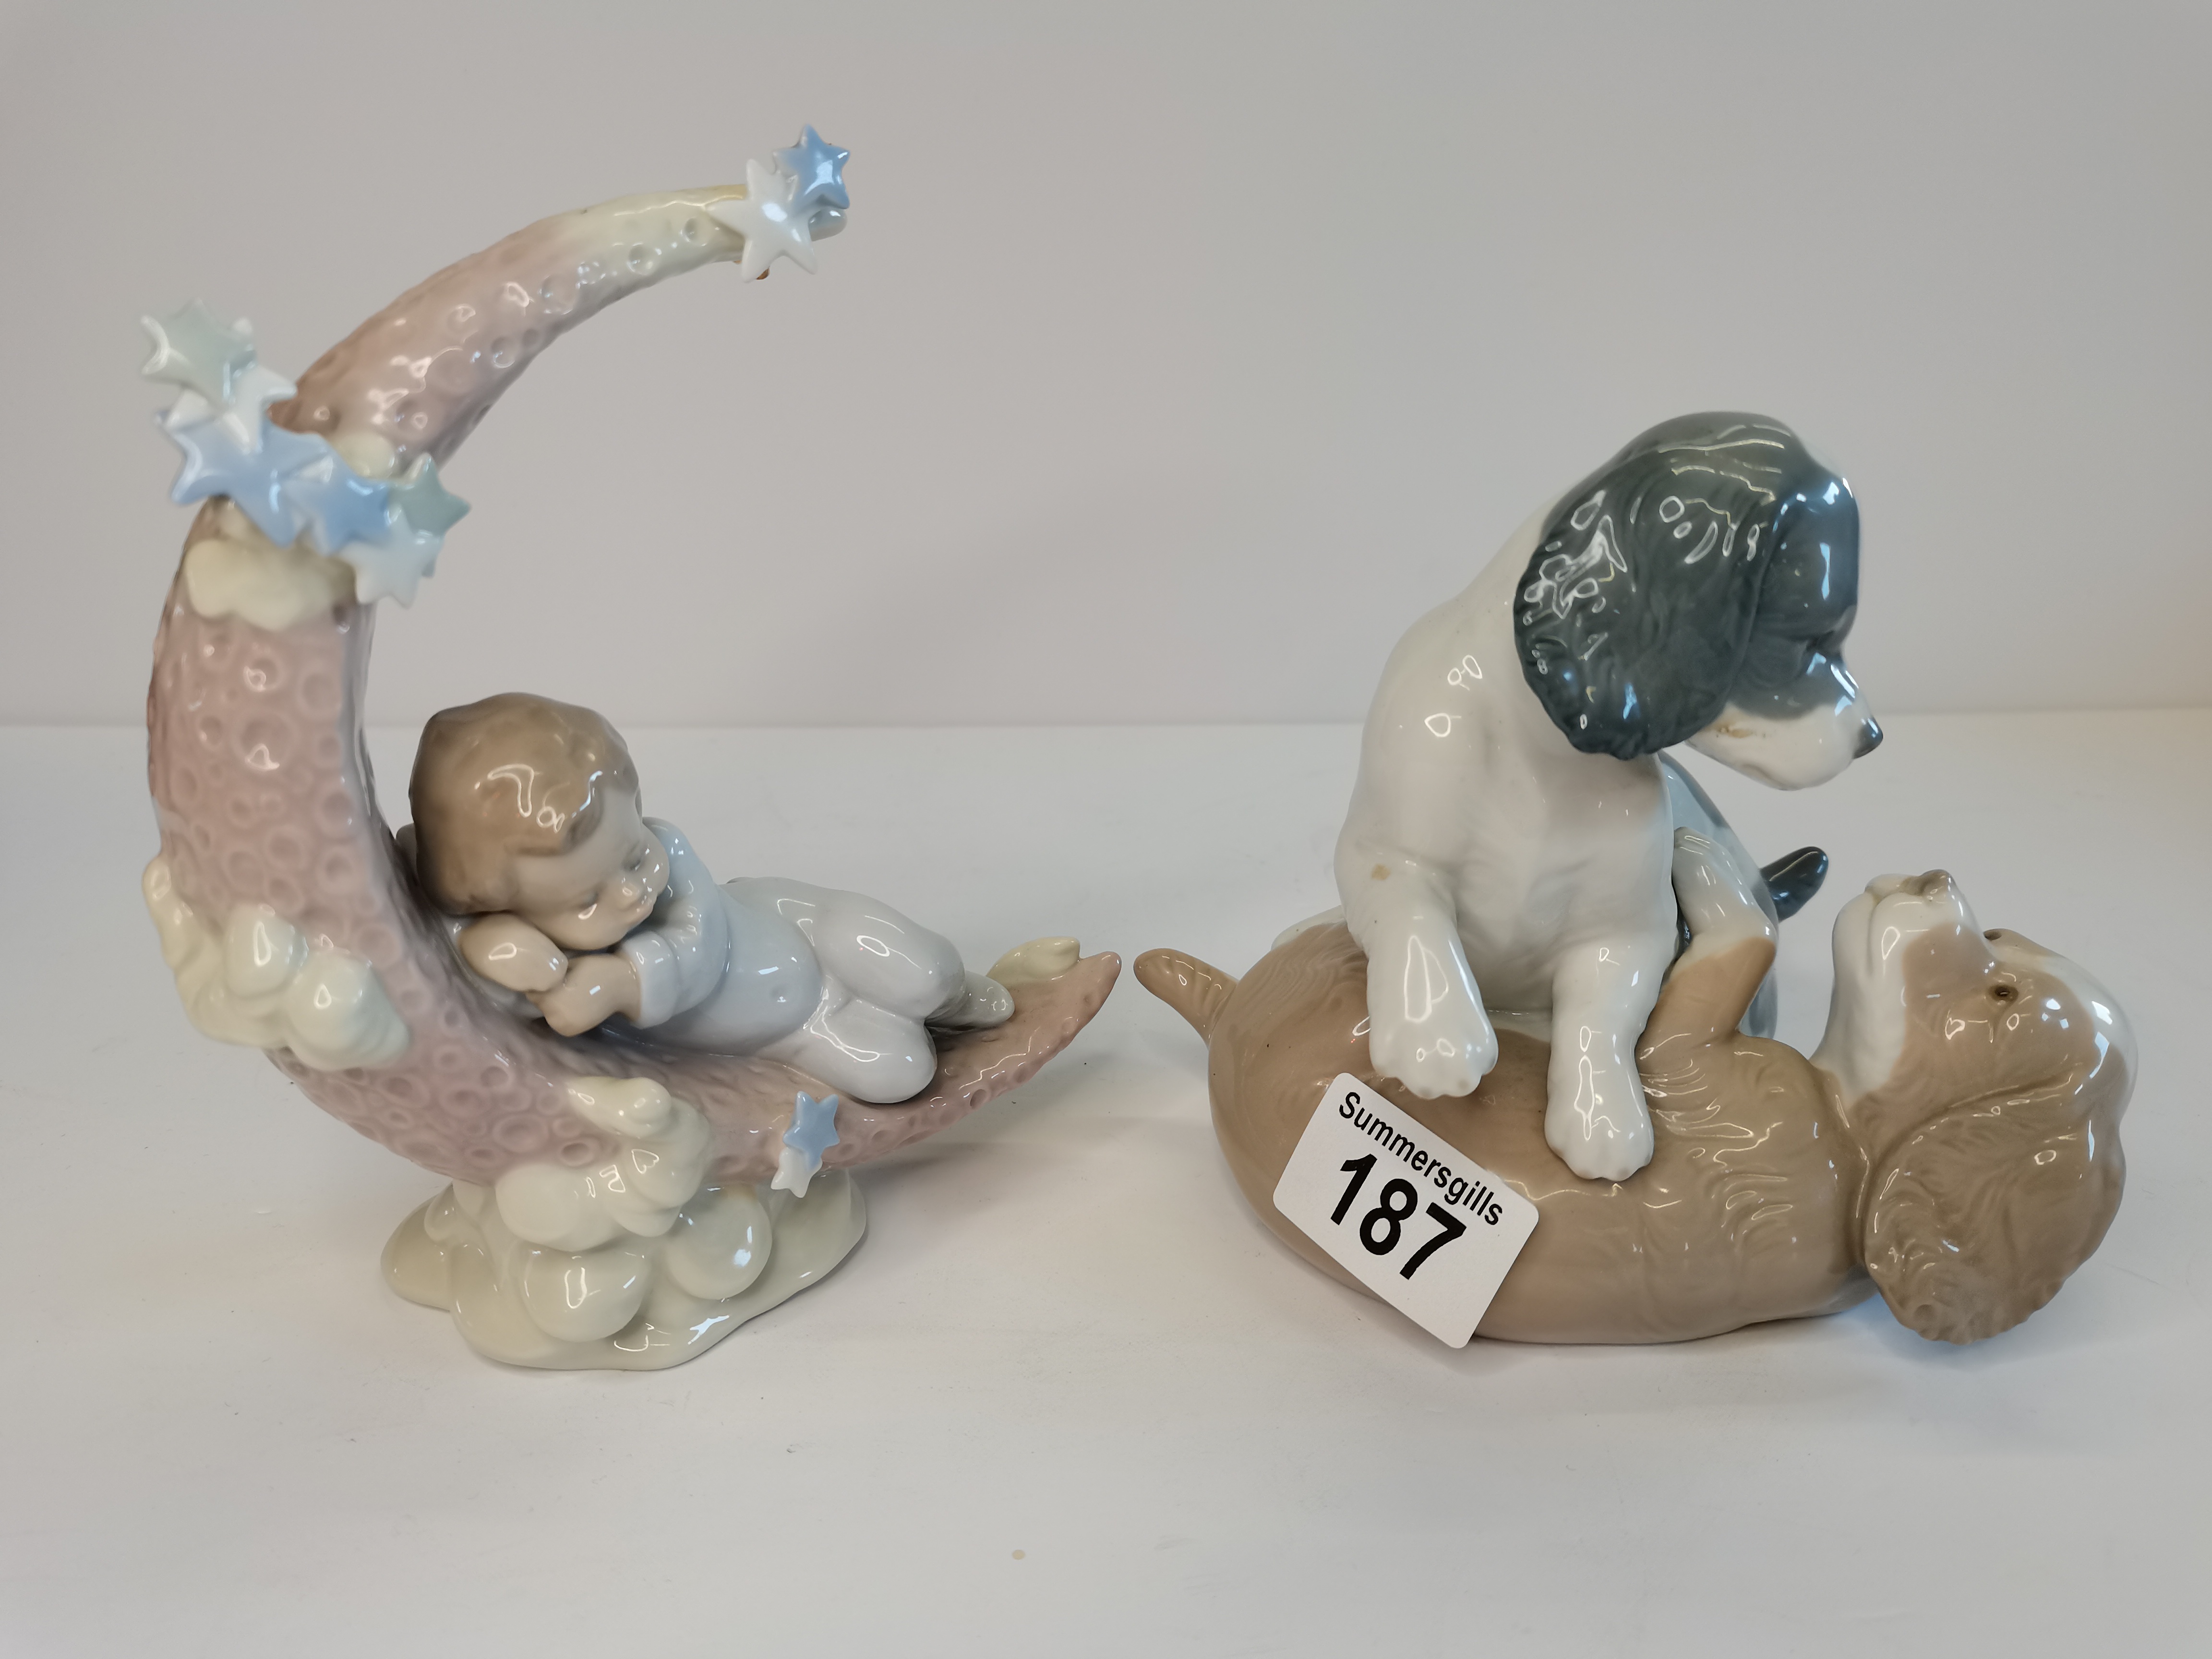 Nao Figurine 'Playful Puppy Dogs' and A Lladro figurine 'Heavenly Slumber'